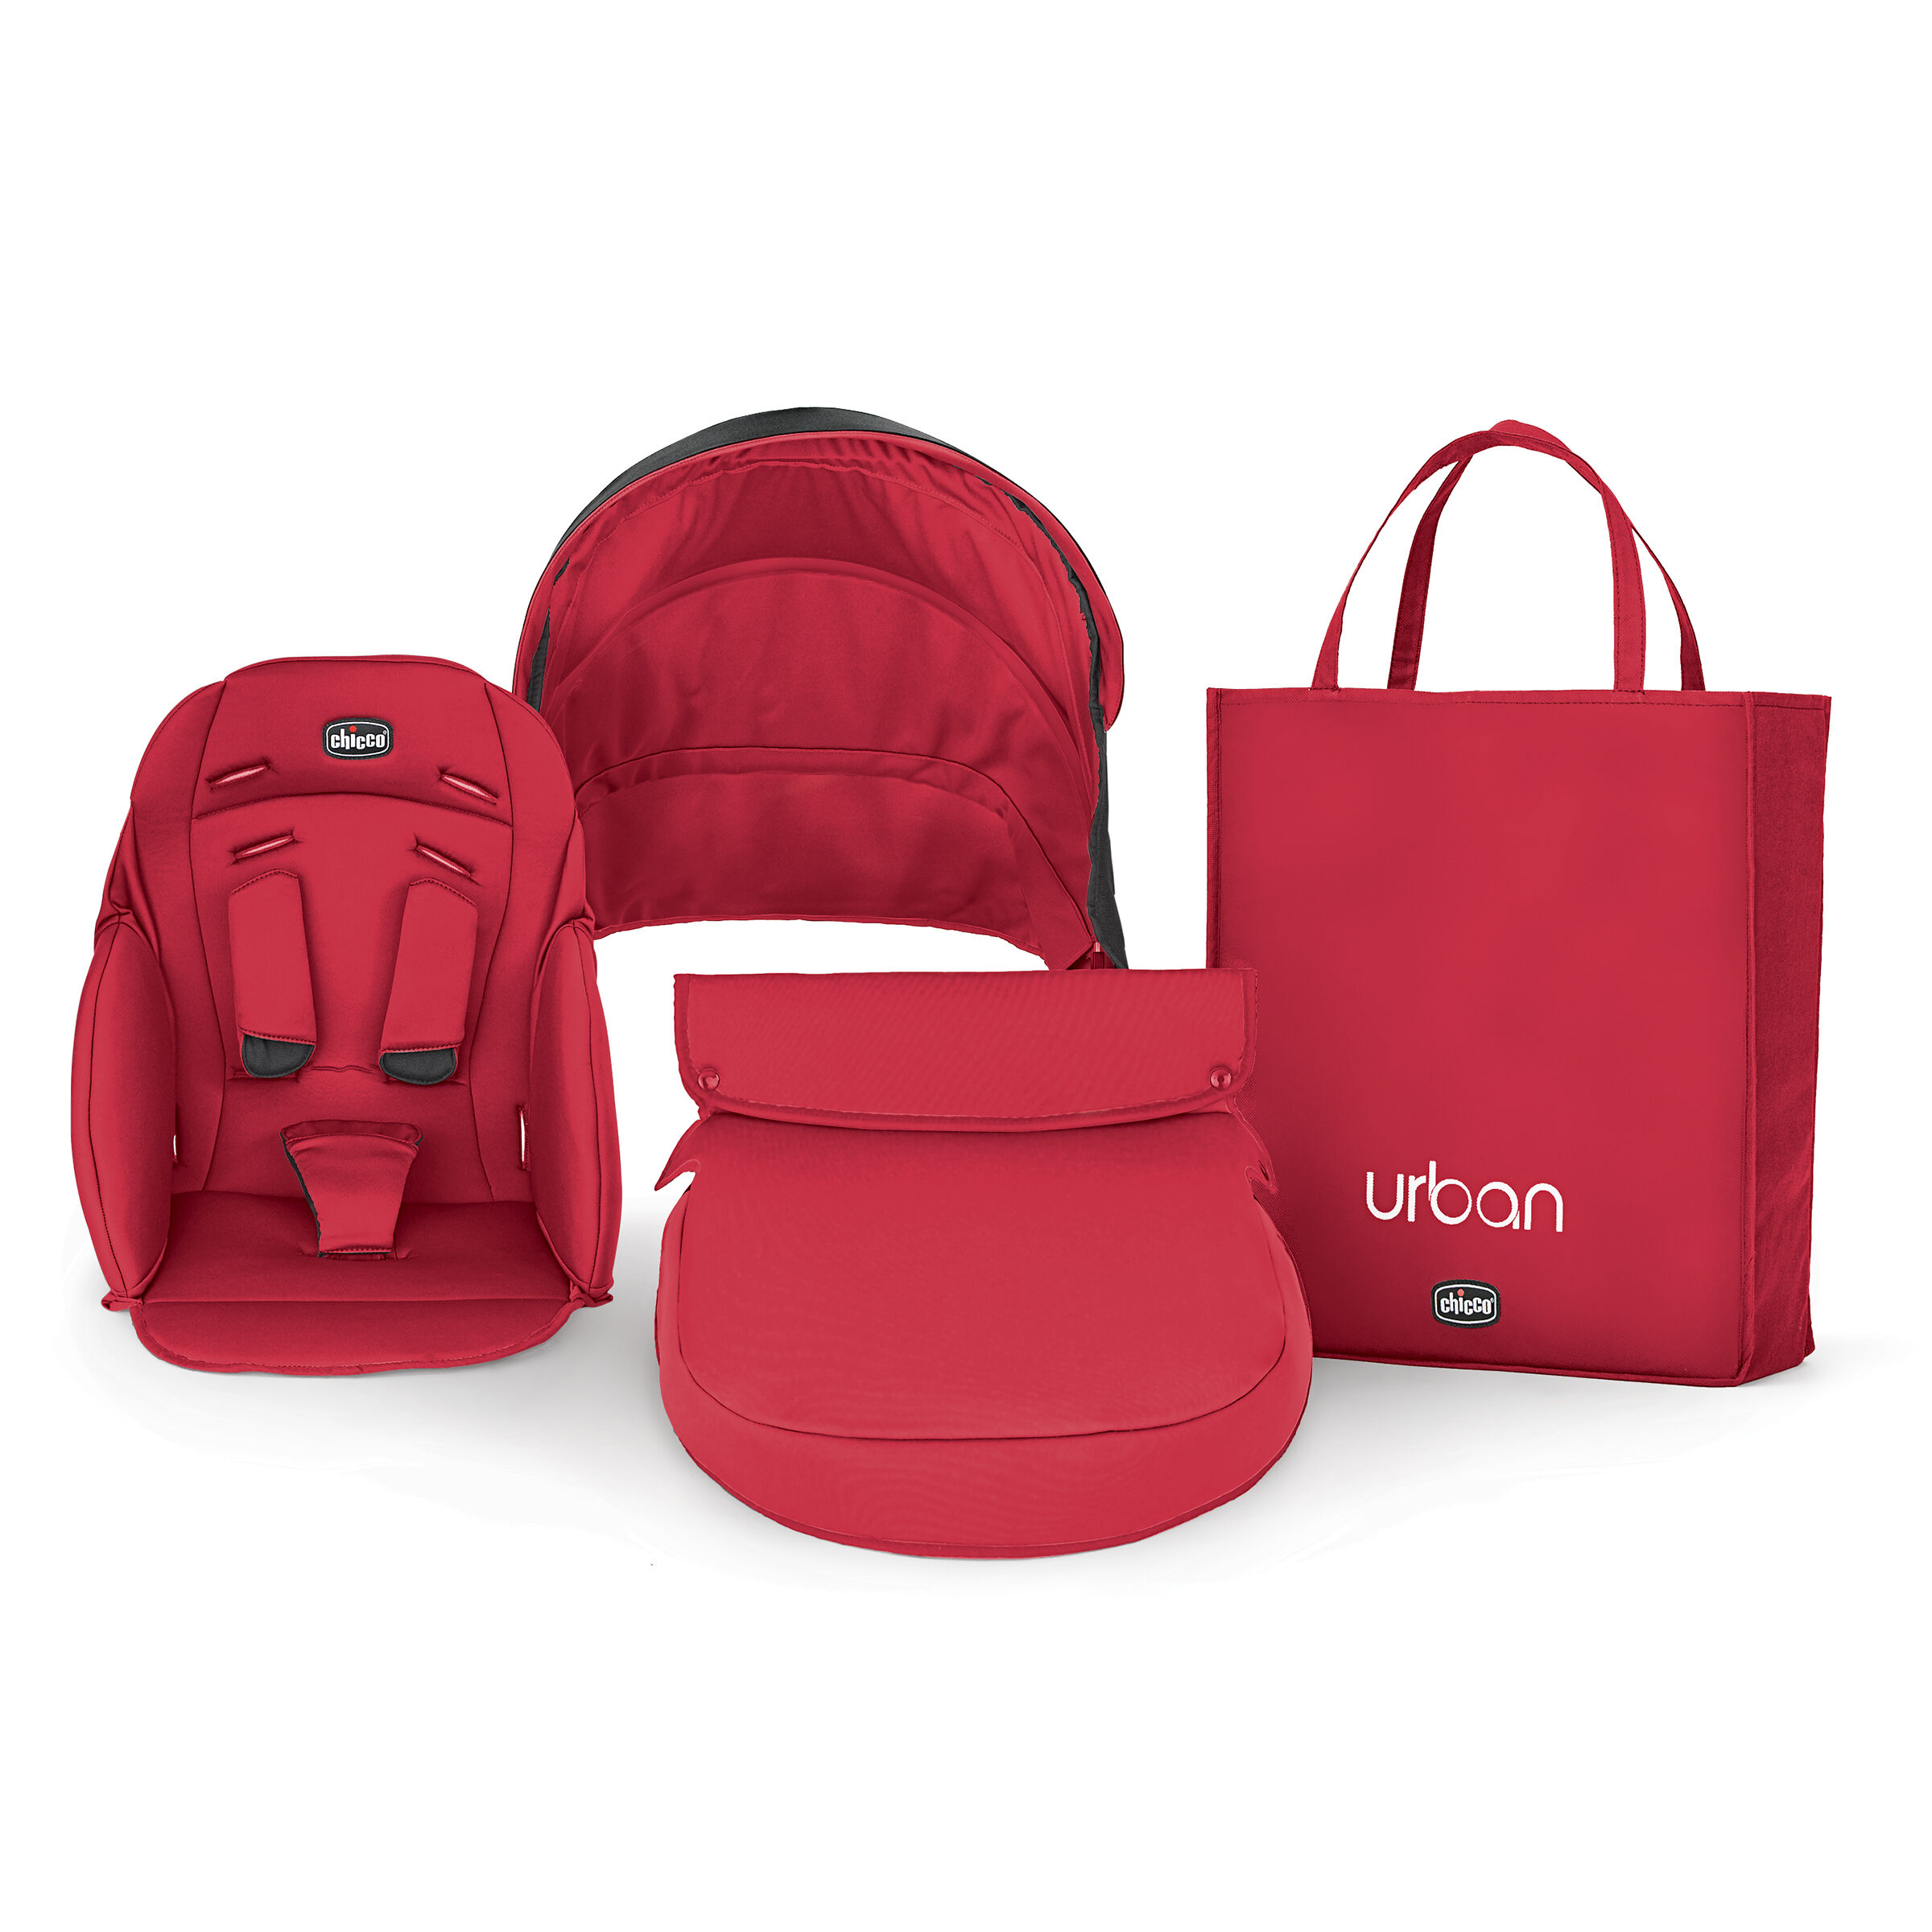 chicco urban red